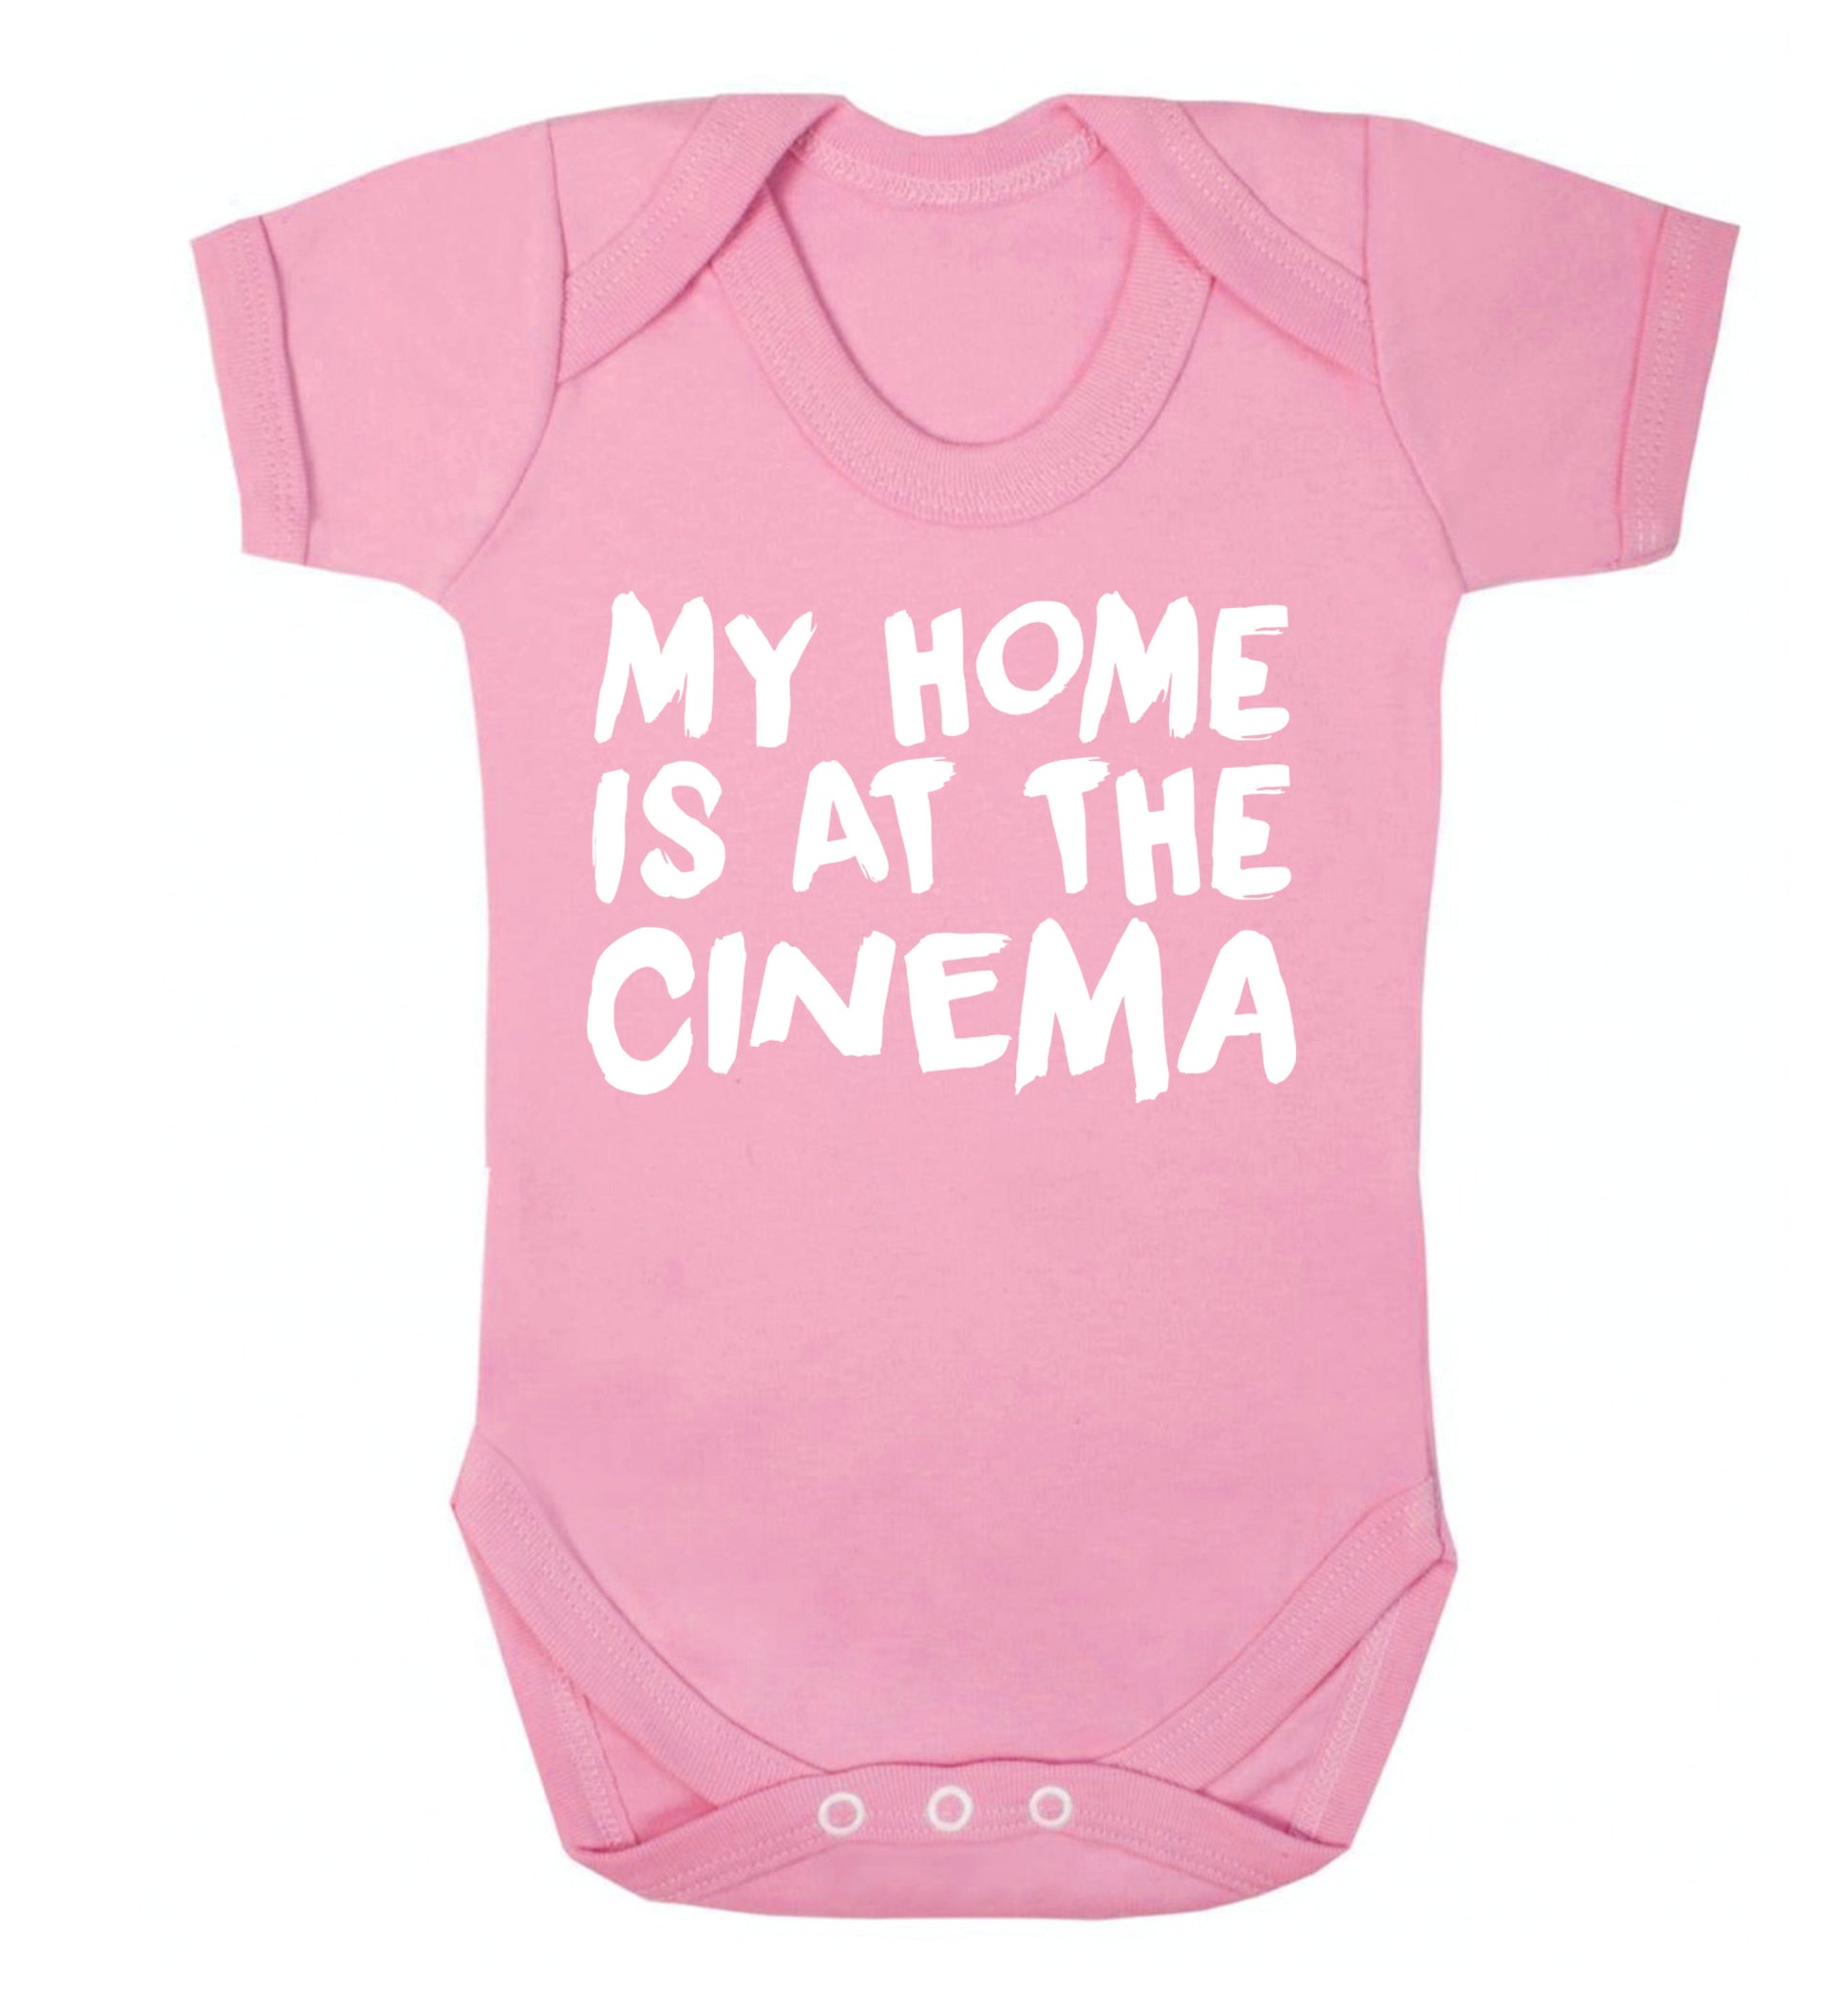 My home is at the cinema Baby Vest pale pink 18-24 months